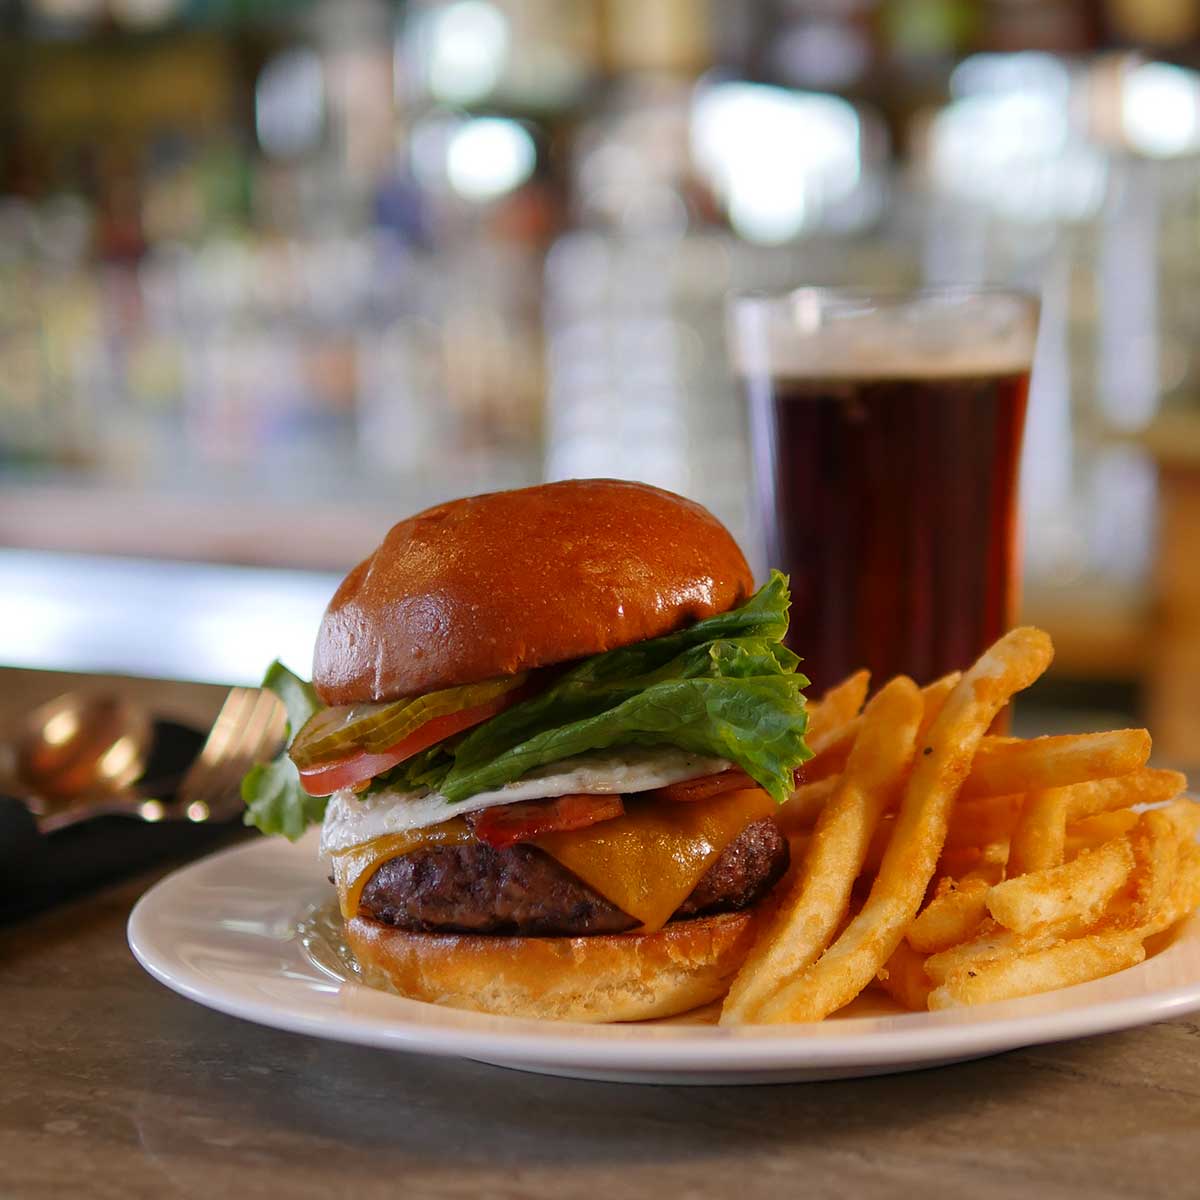 Timbers burger with fries and dark beer